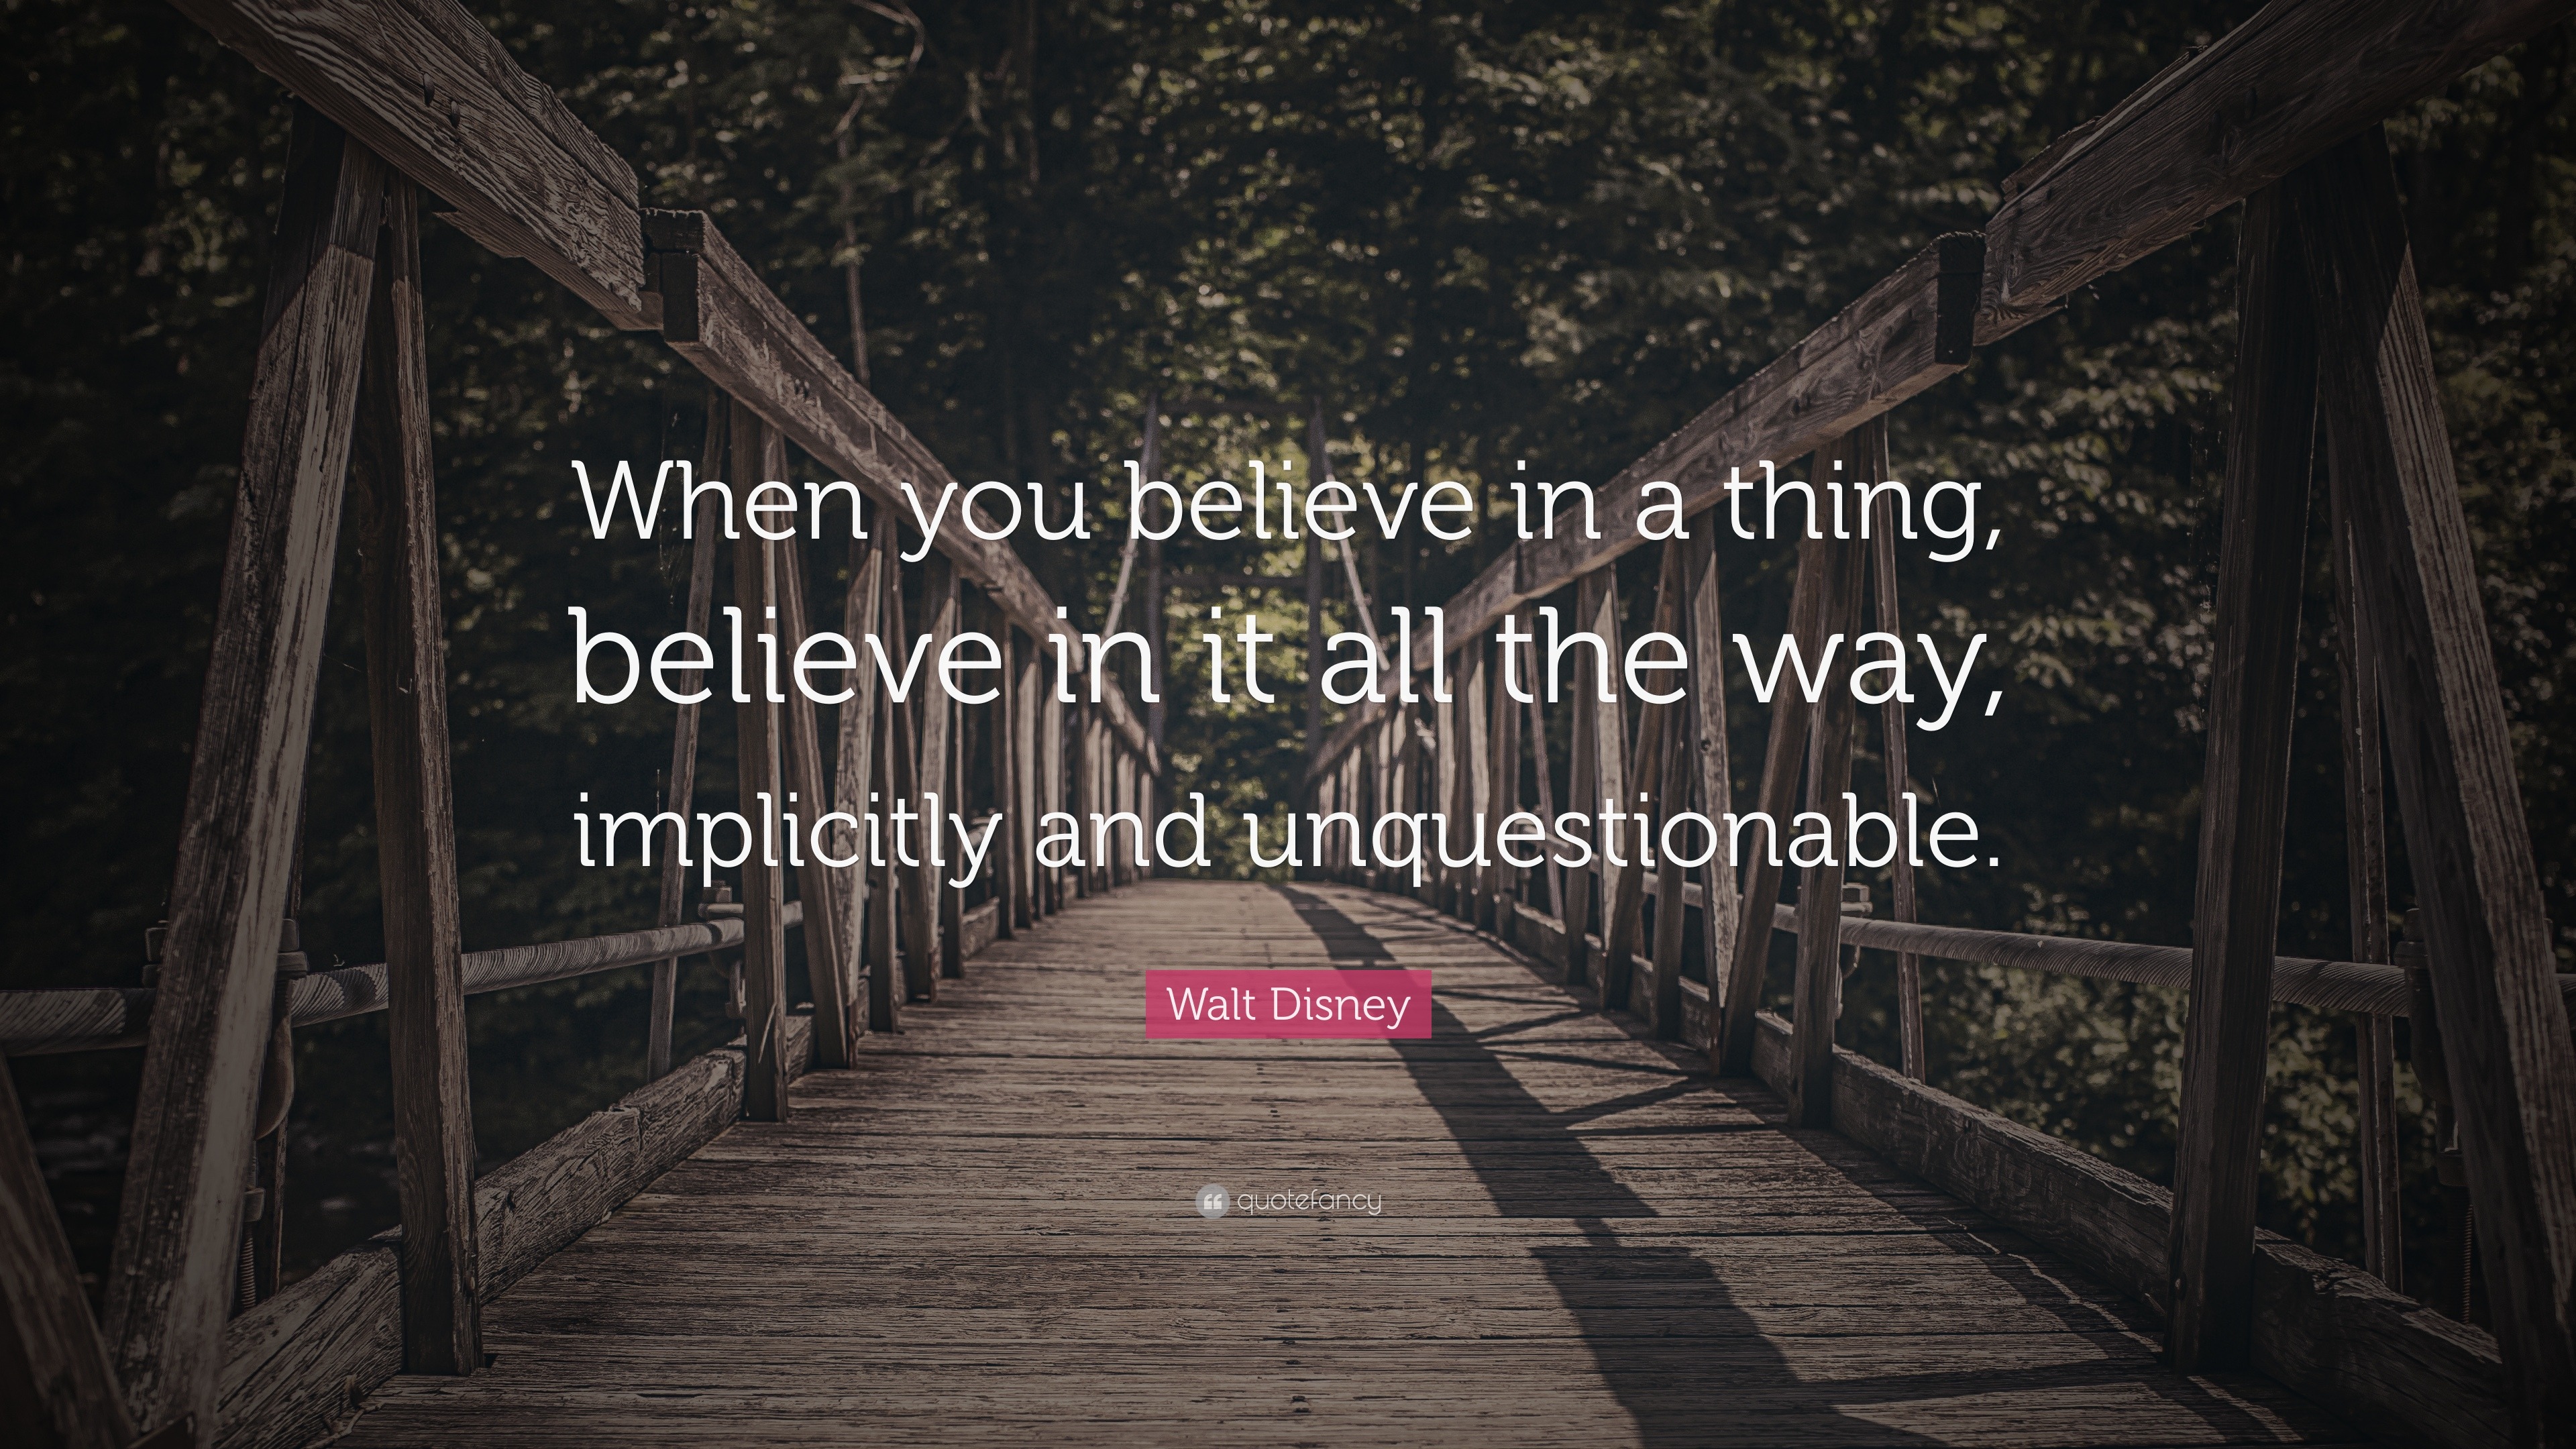 Walt Disney Quote When You Believe In A Thing Believe In It All The Way Implicitly